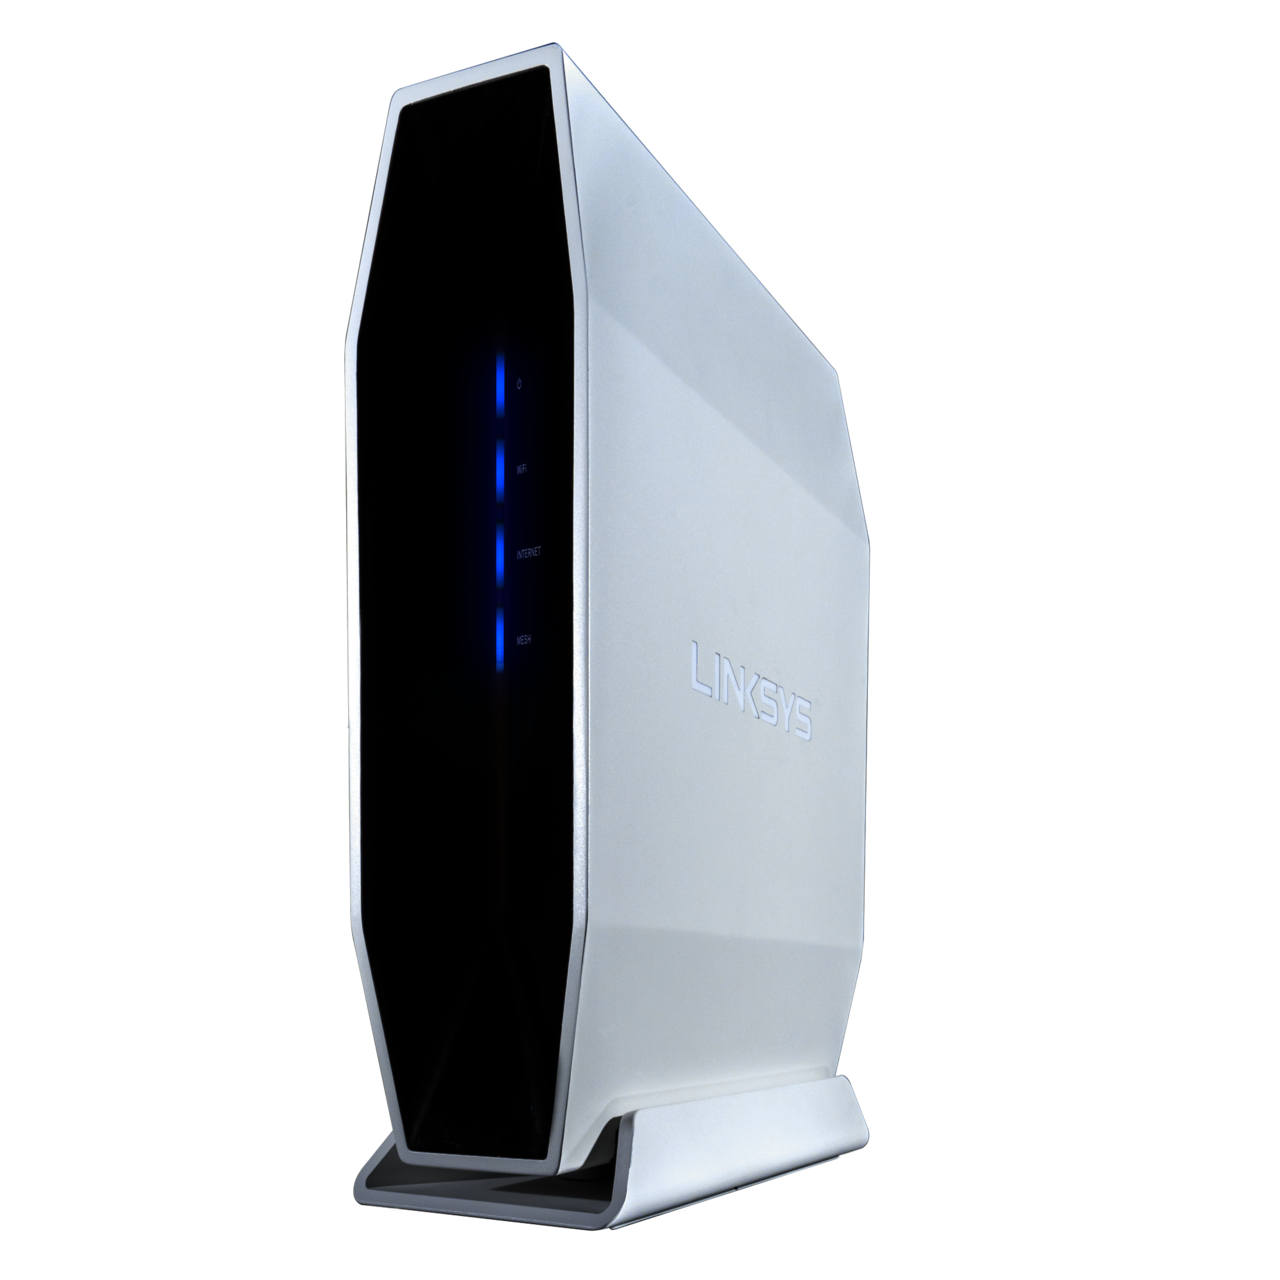 Dual-Band AX5400 WiFi 6 EasyMesh™ Compatible Router (E9450